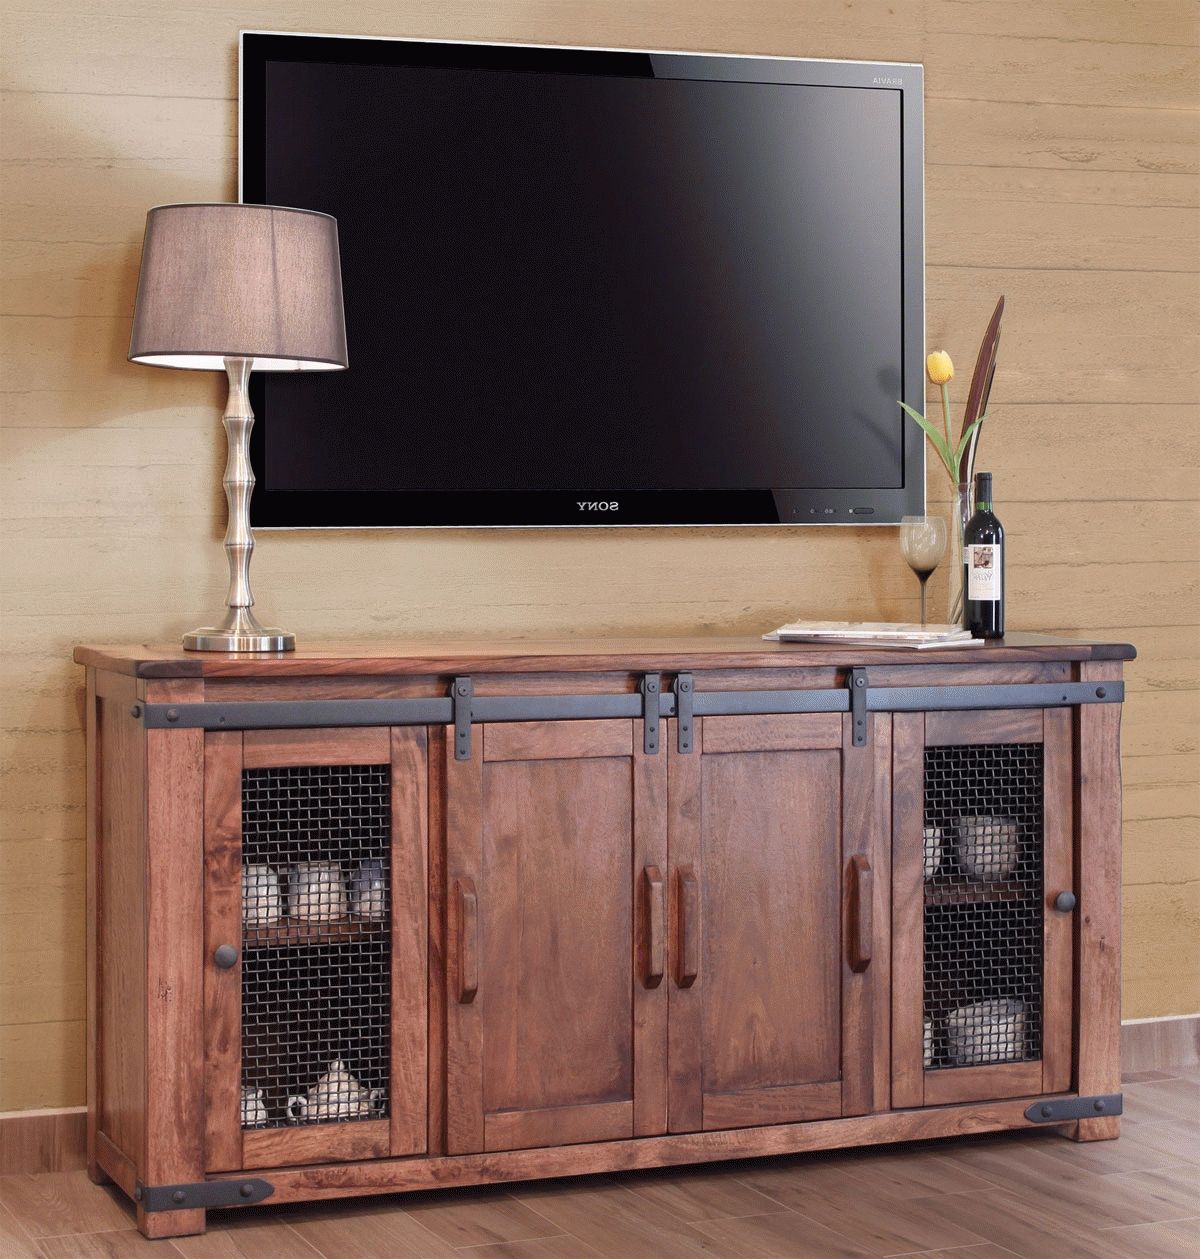 Barn Door Tv Stand, Rustic Barn Door Tv Stand, Rustic Tv Stand Intended For Rustic Oak Tv Stands (View 15 of 15)